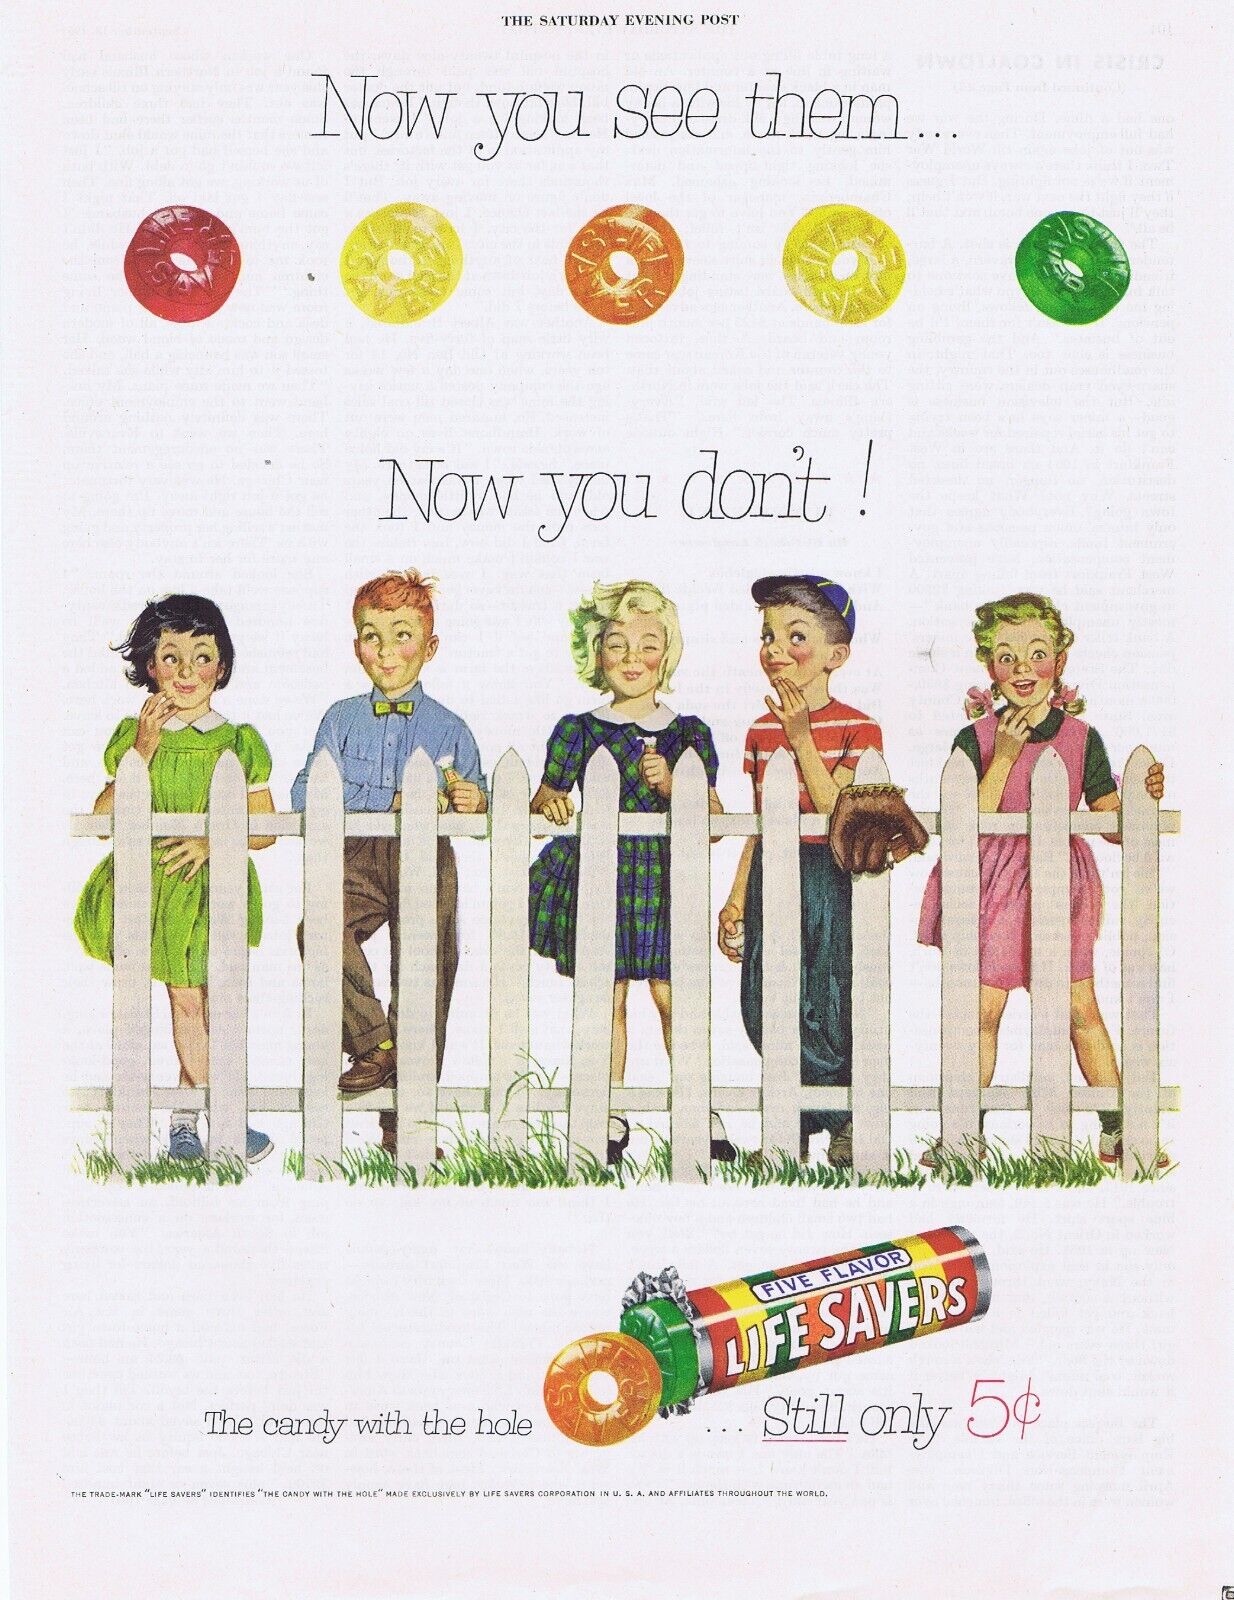 1954 Original LIFE SAVERS CANDY Vintage Ad KIDS AT WHITE PICKET FENCE - FIFTIES